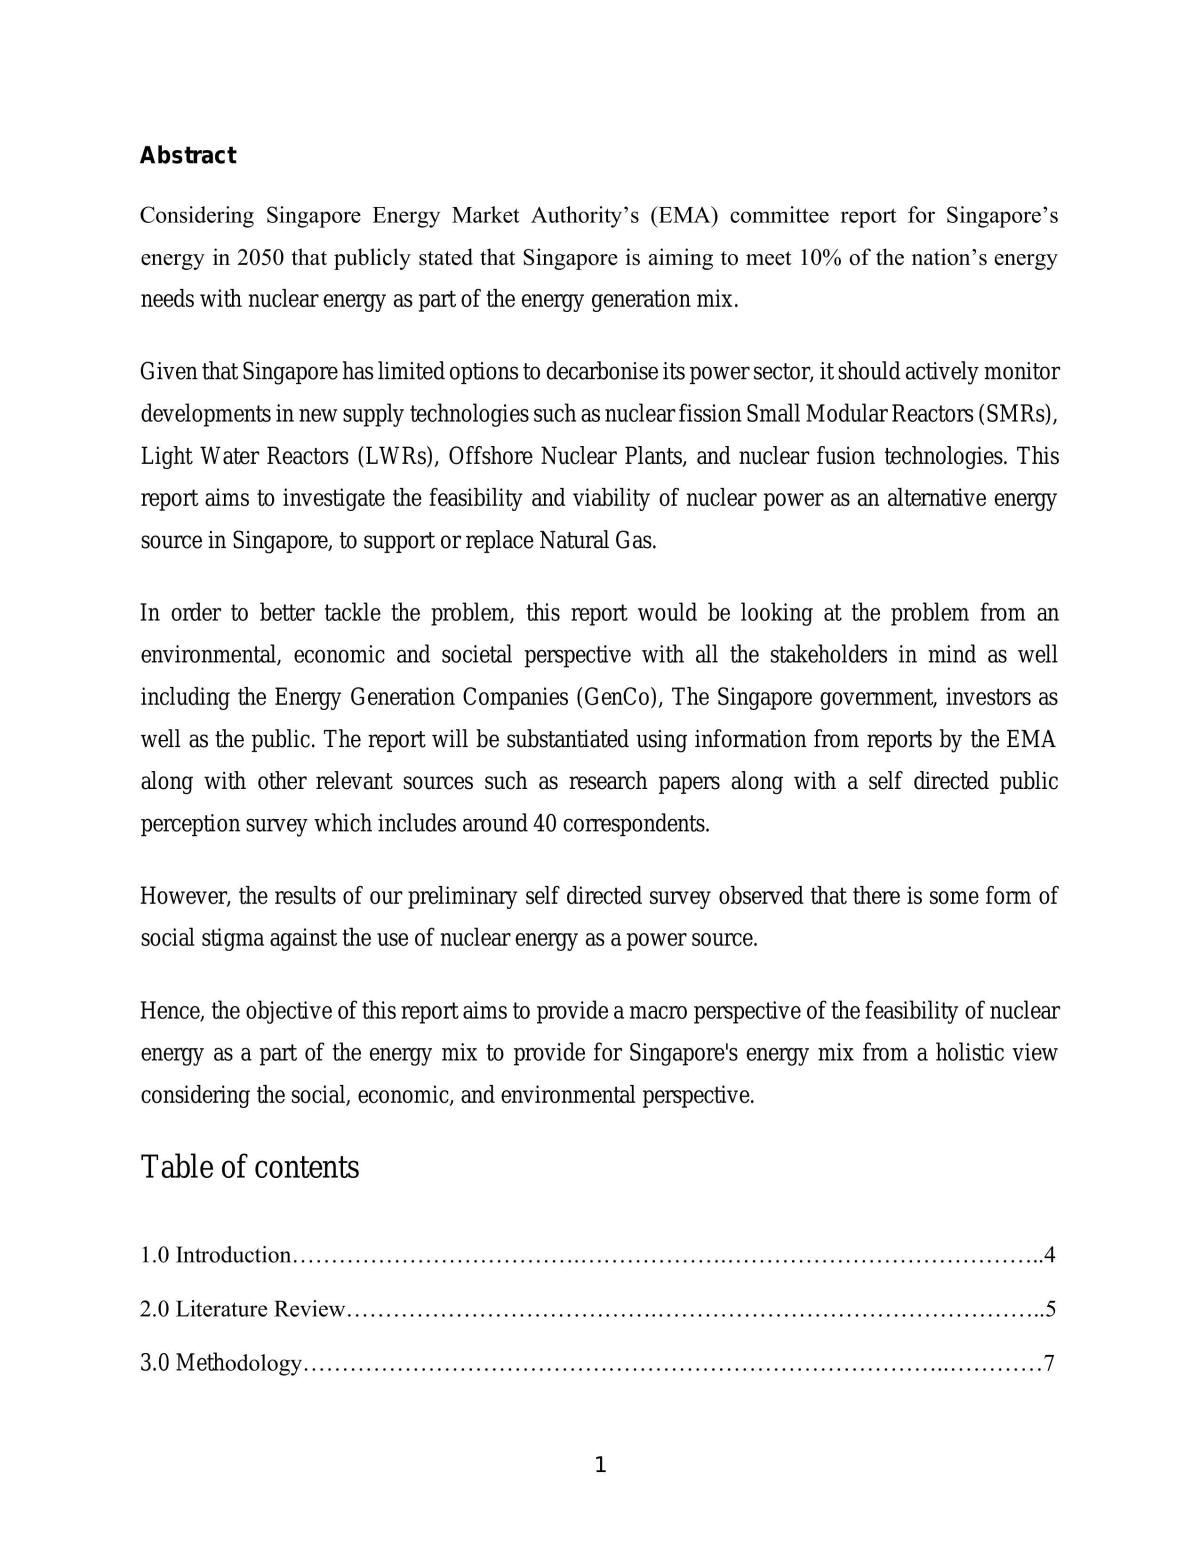 Feasibility of nuclear energy in Singapore - Page 1